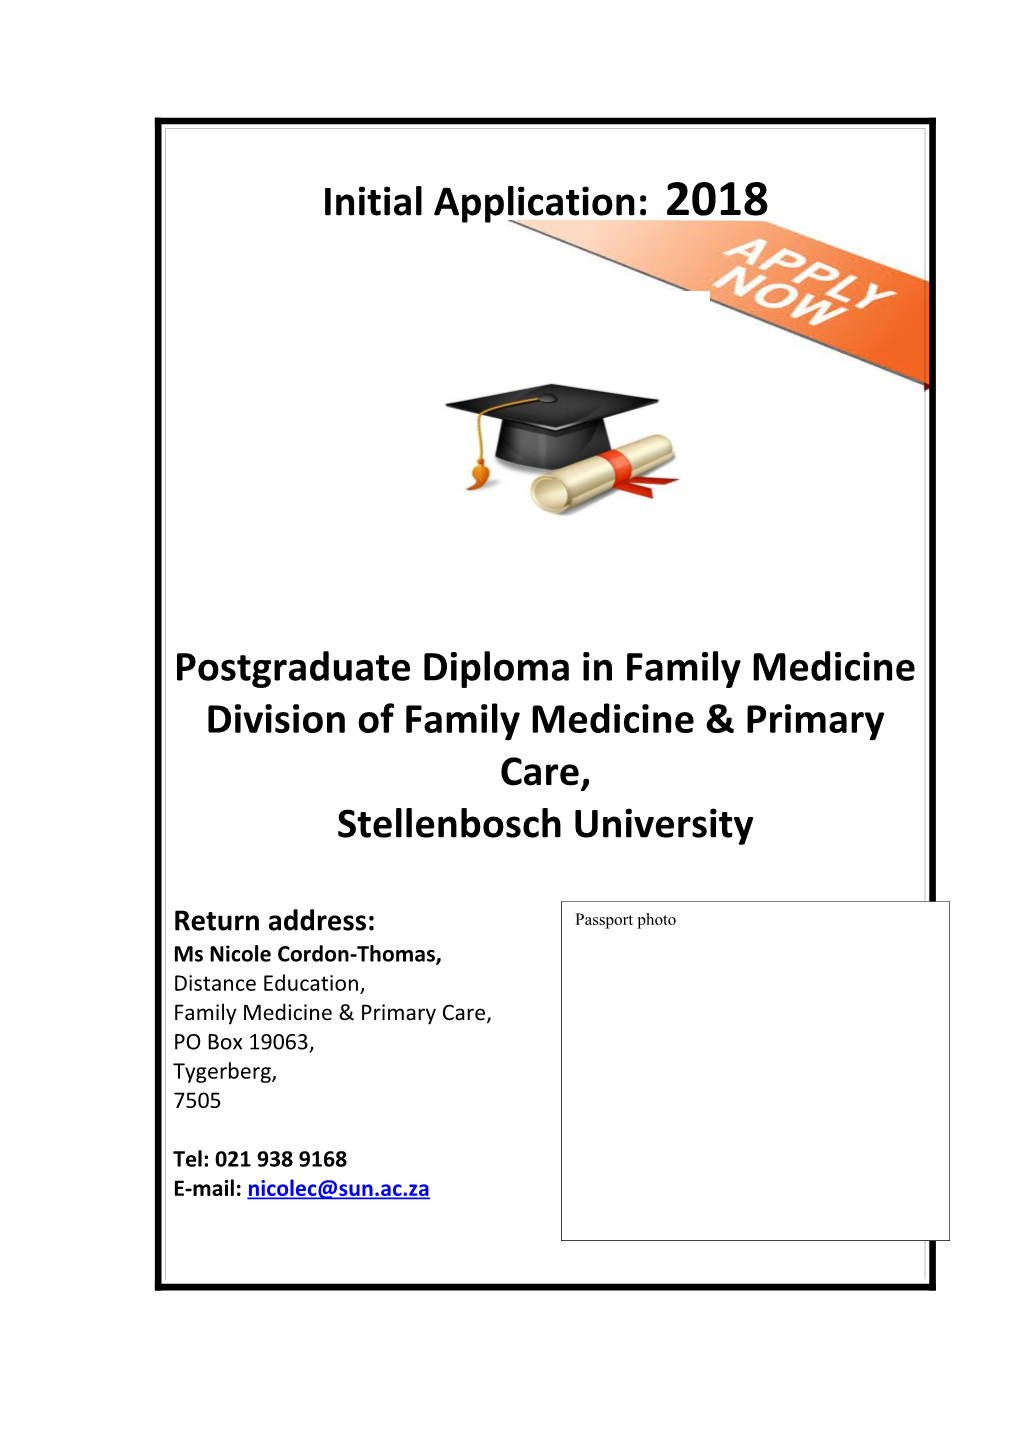 Application for Postgraduate Courses at the Department of Family Medicine